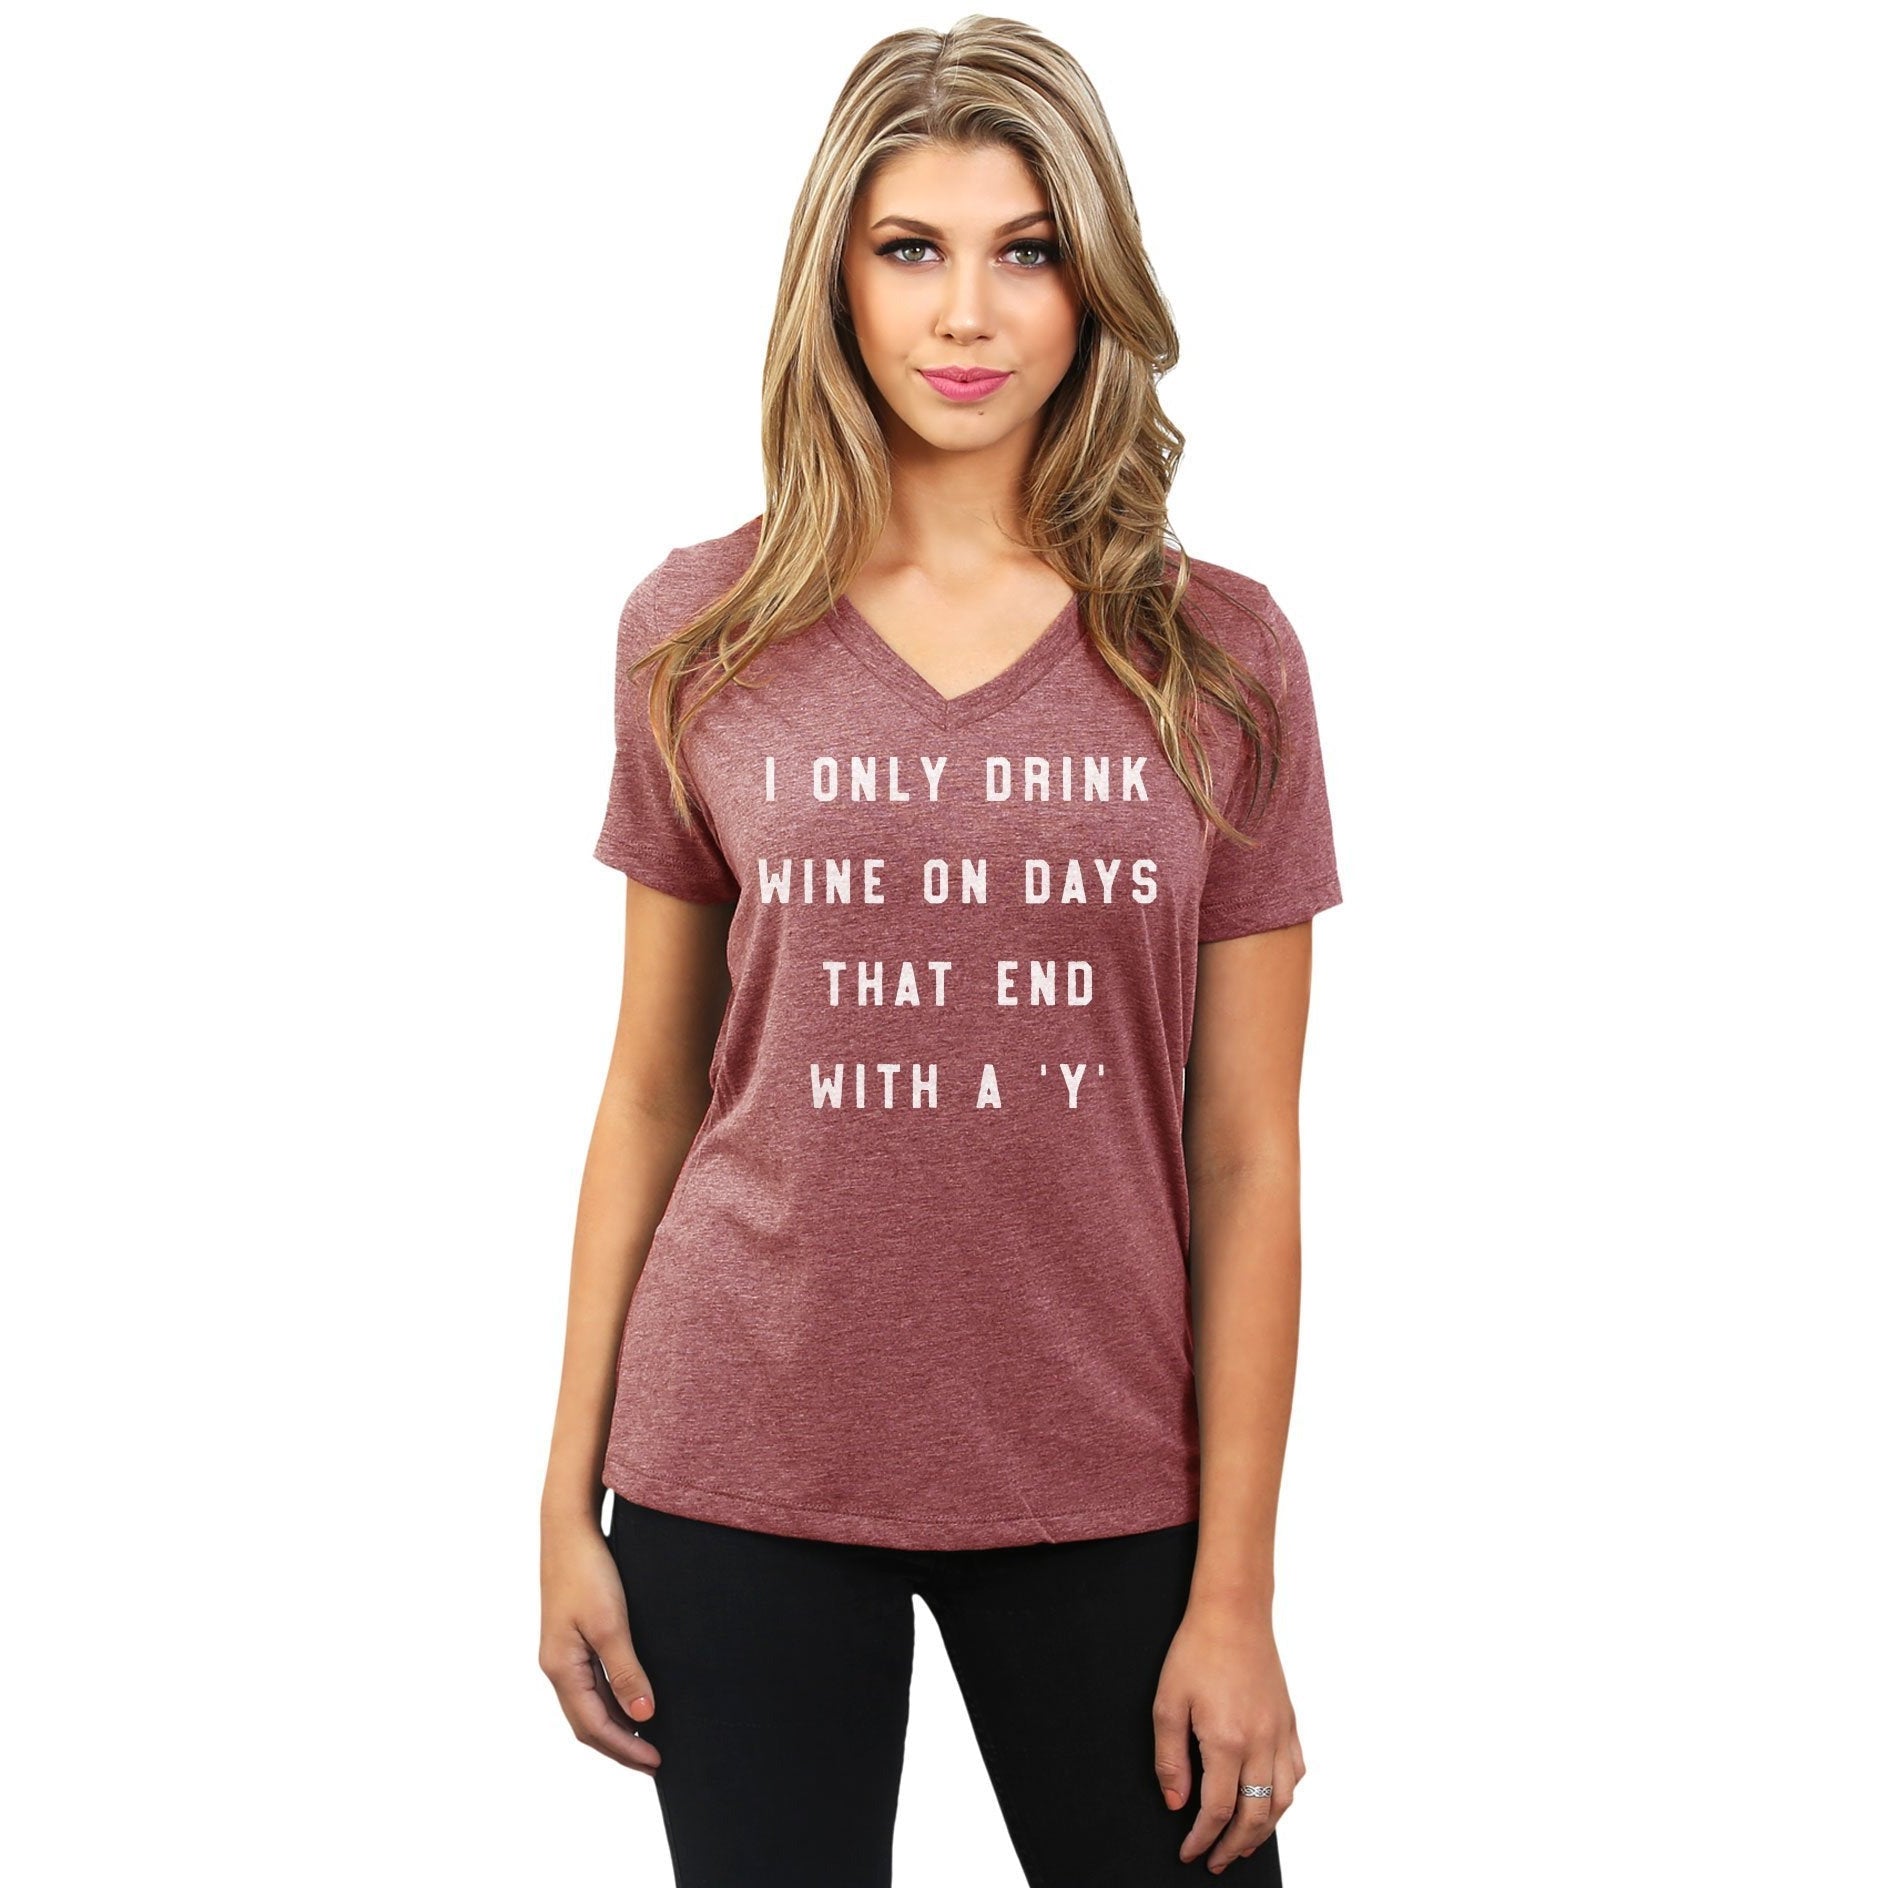 Drink Wine On Days Ends With Y Women's Relaxed Crewneck T-Shirt Top Tee Heather Rouge Model
